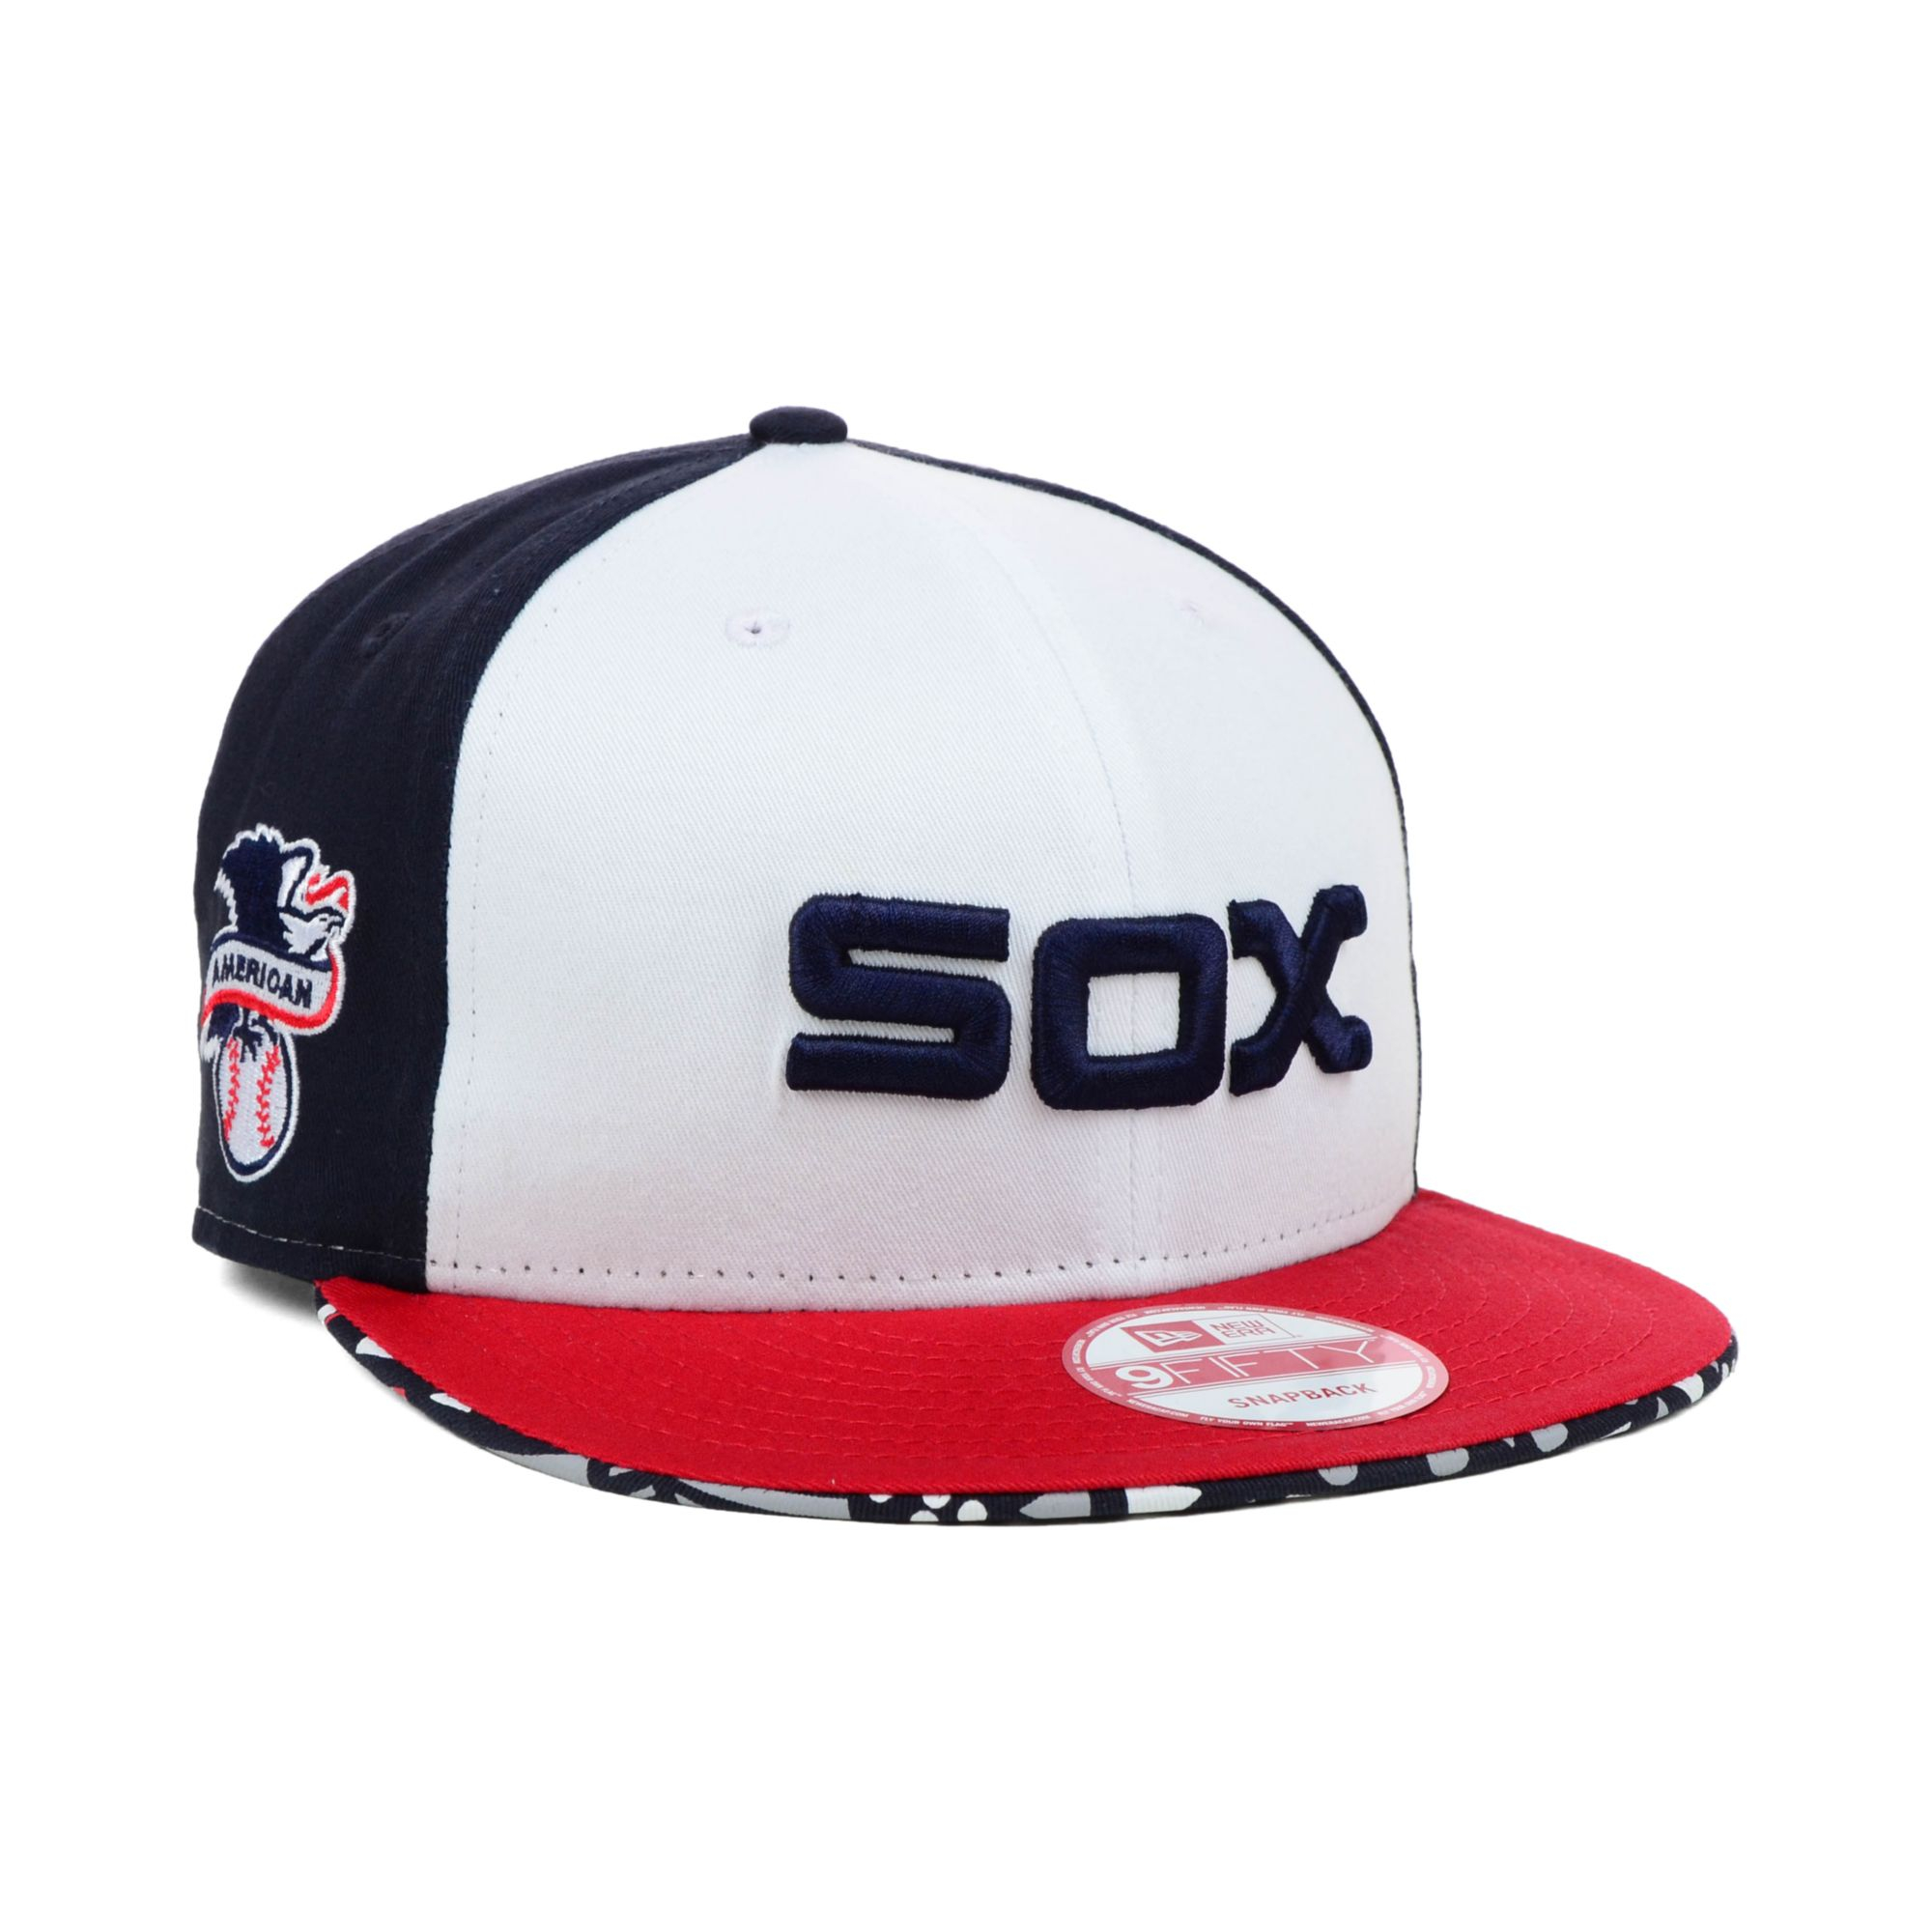 New Era Chicago White Sox Cross Colors Snapback Cap in Multicolor for ...